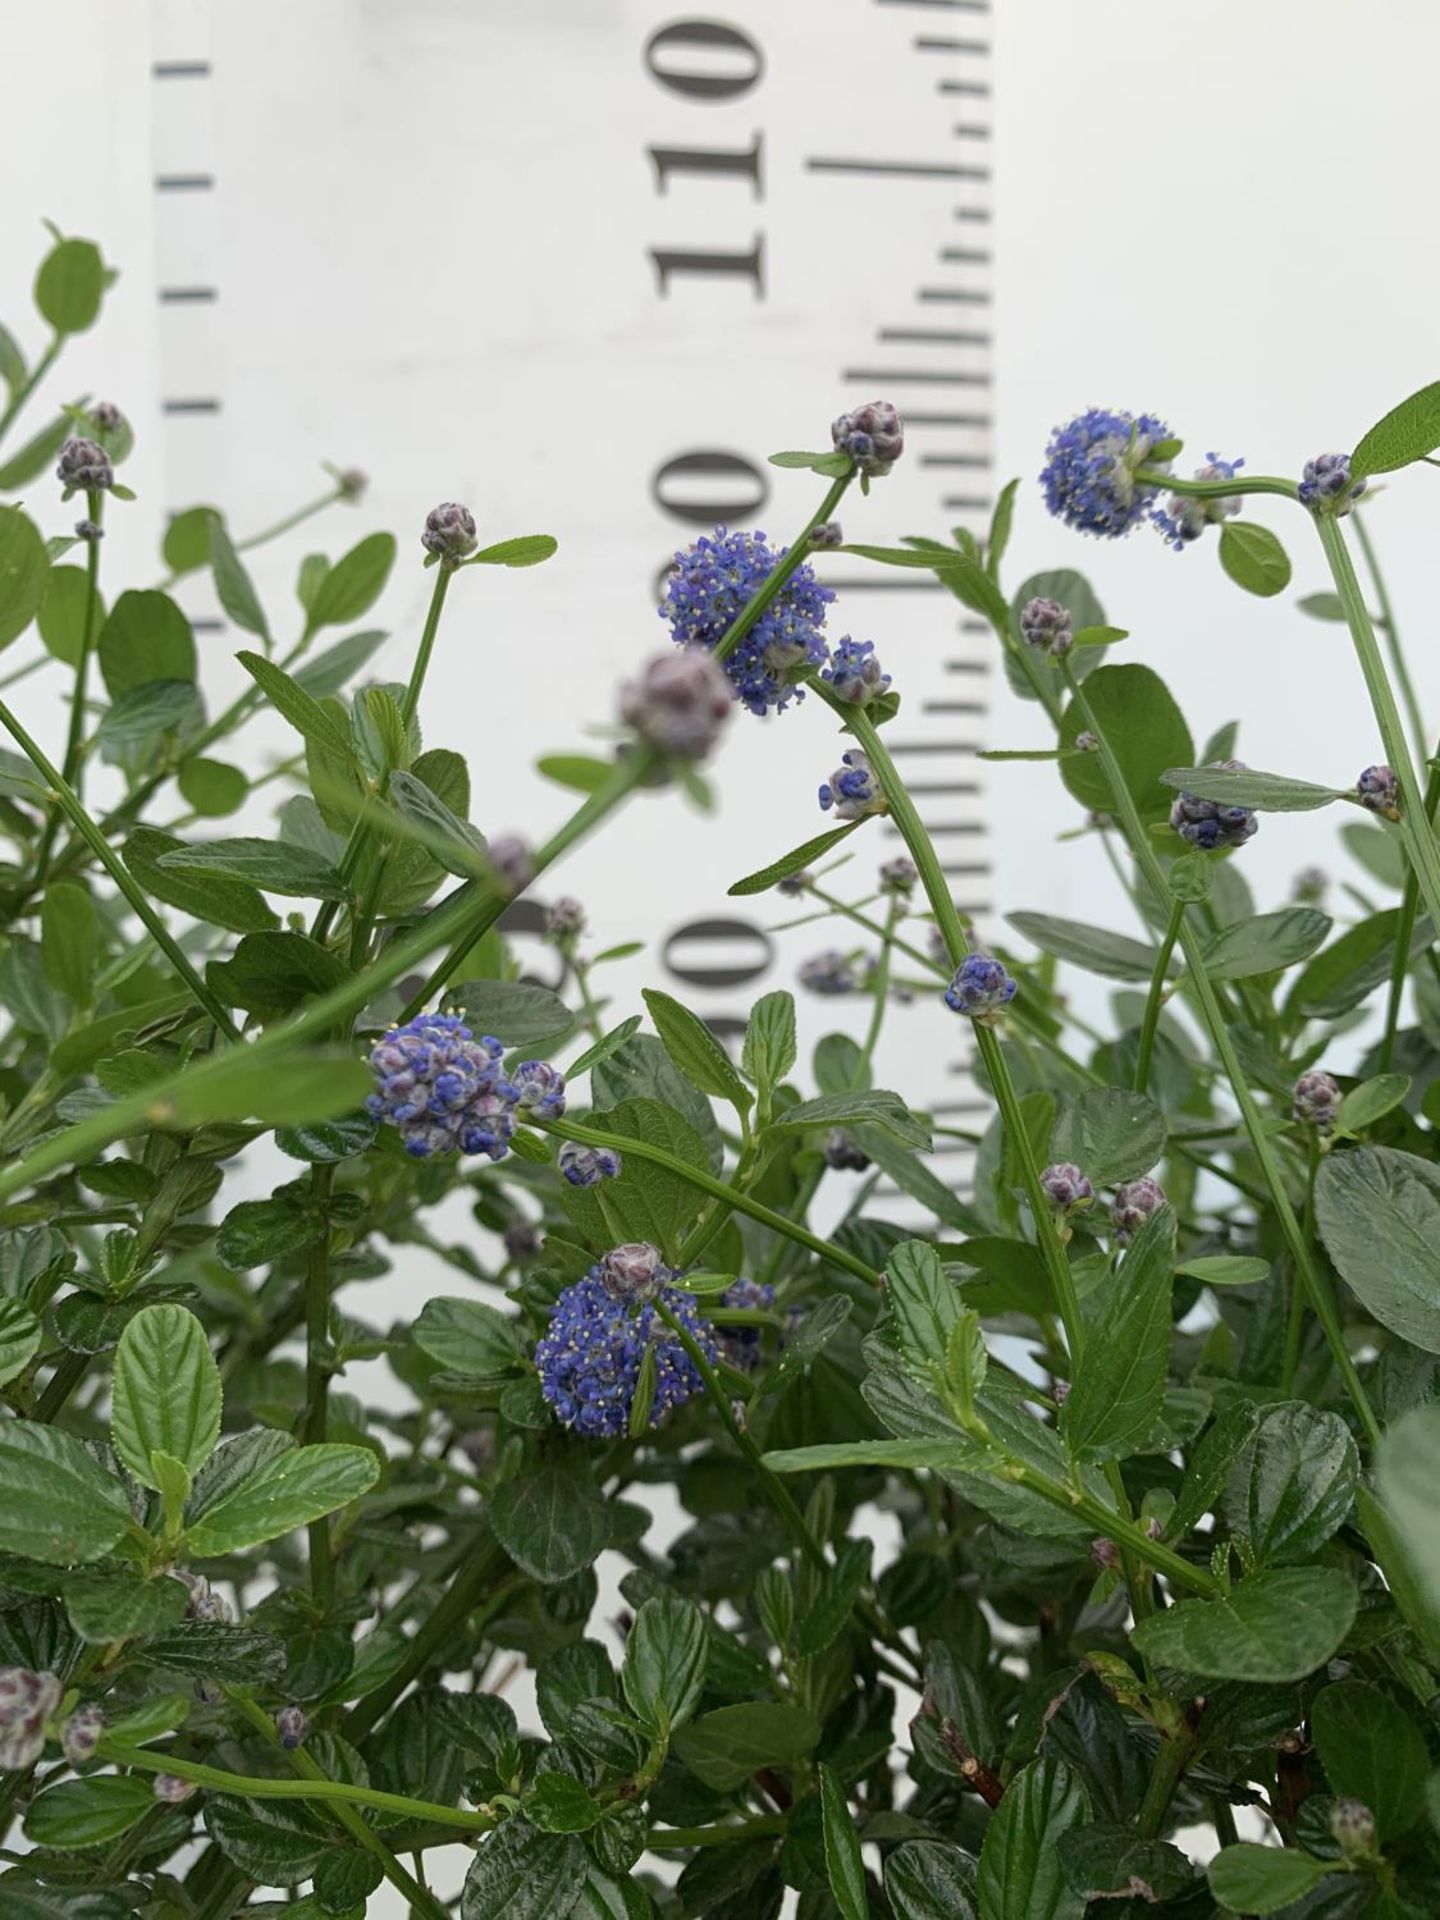 TWO CEANOTHUS IMPRESSUS STANDARD TREES 'VICTORIA' IN FLOWER APPROX A METRE IN HEIGHT IN 3 LTR POTS - Image 3 of 8